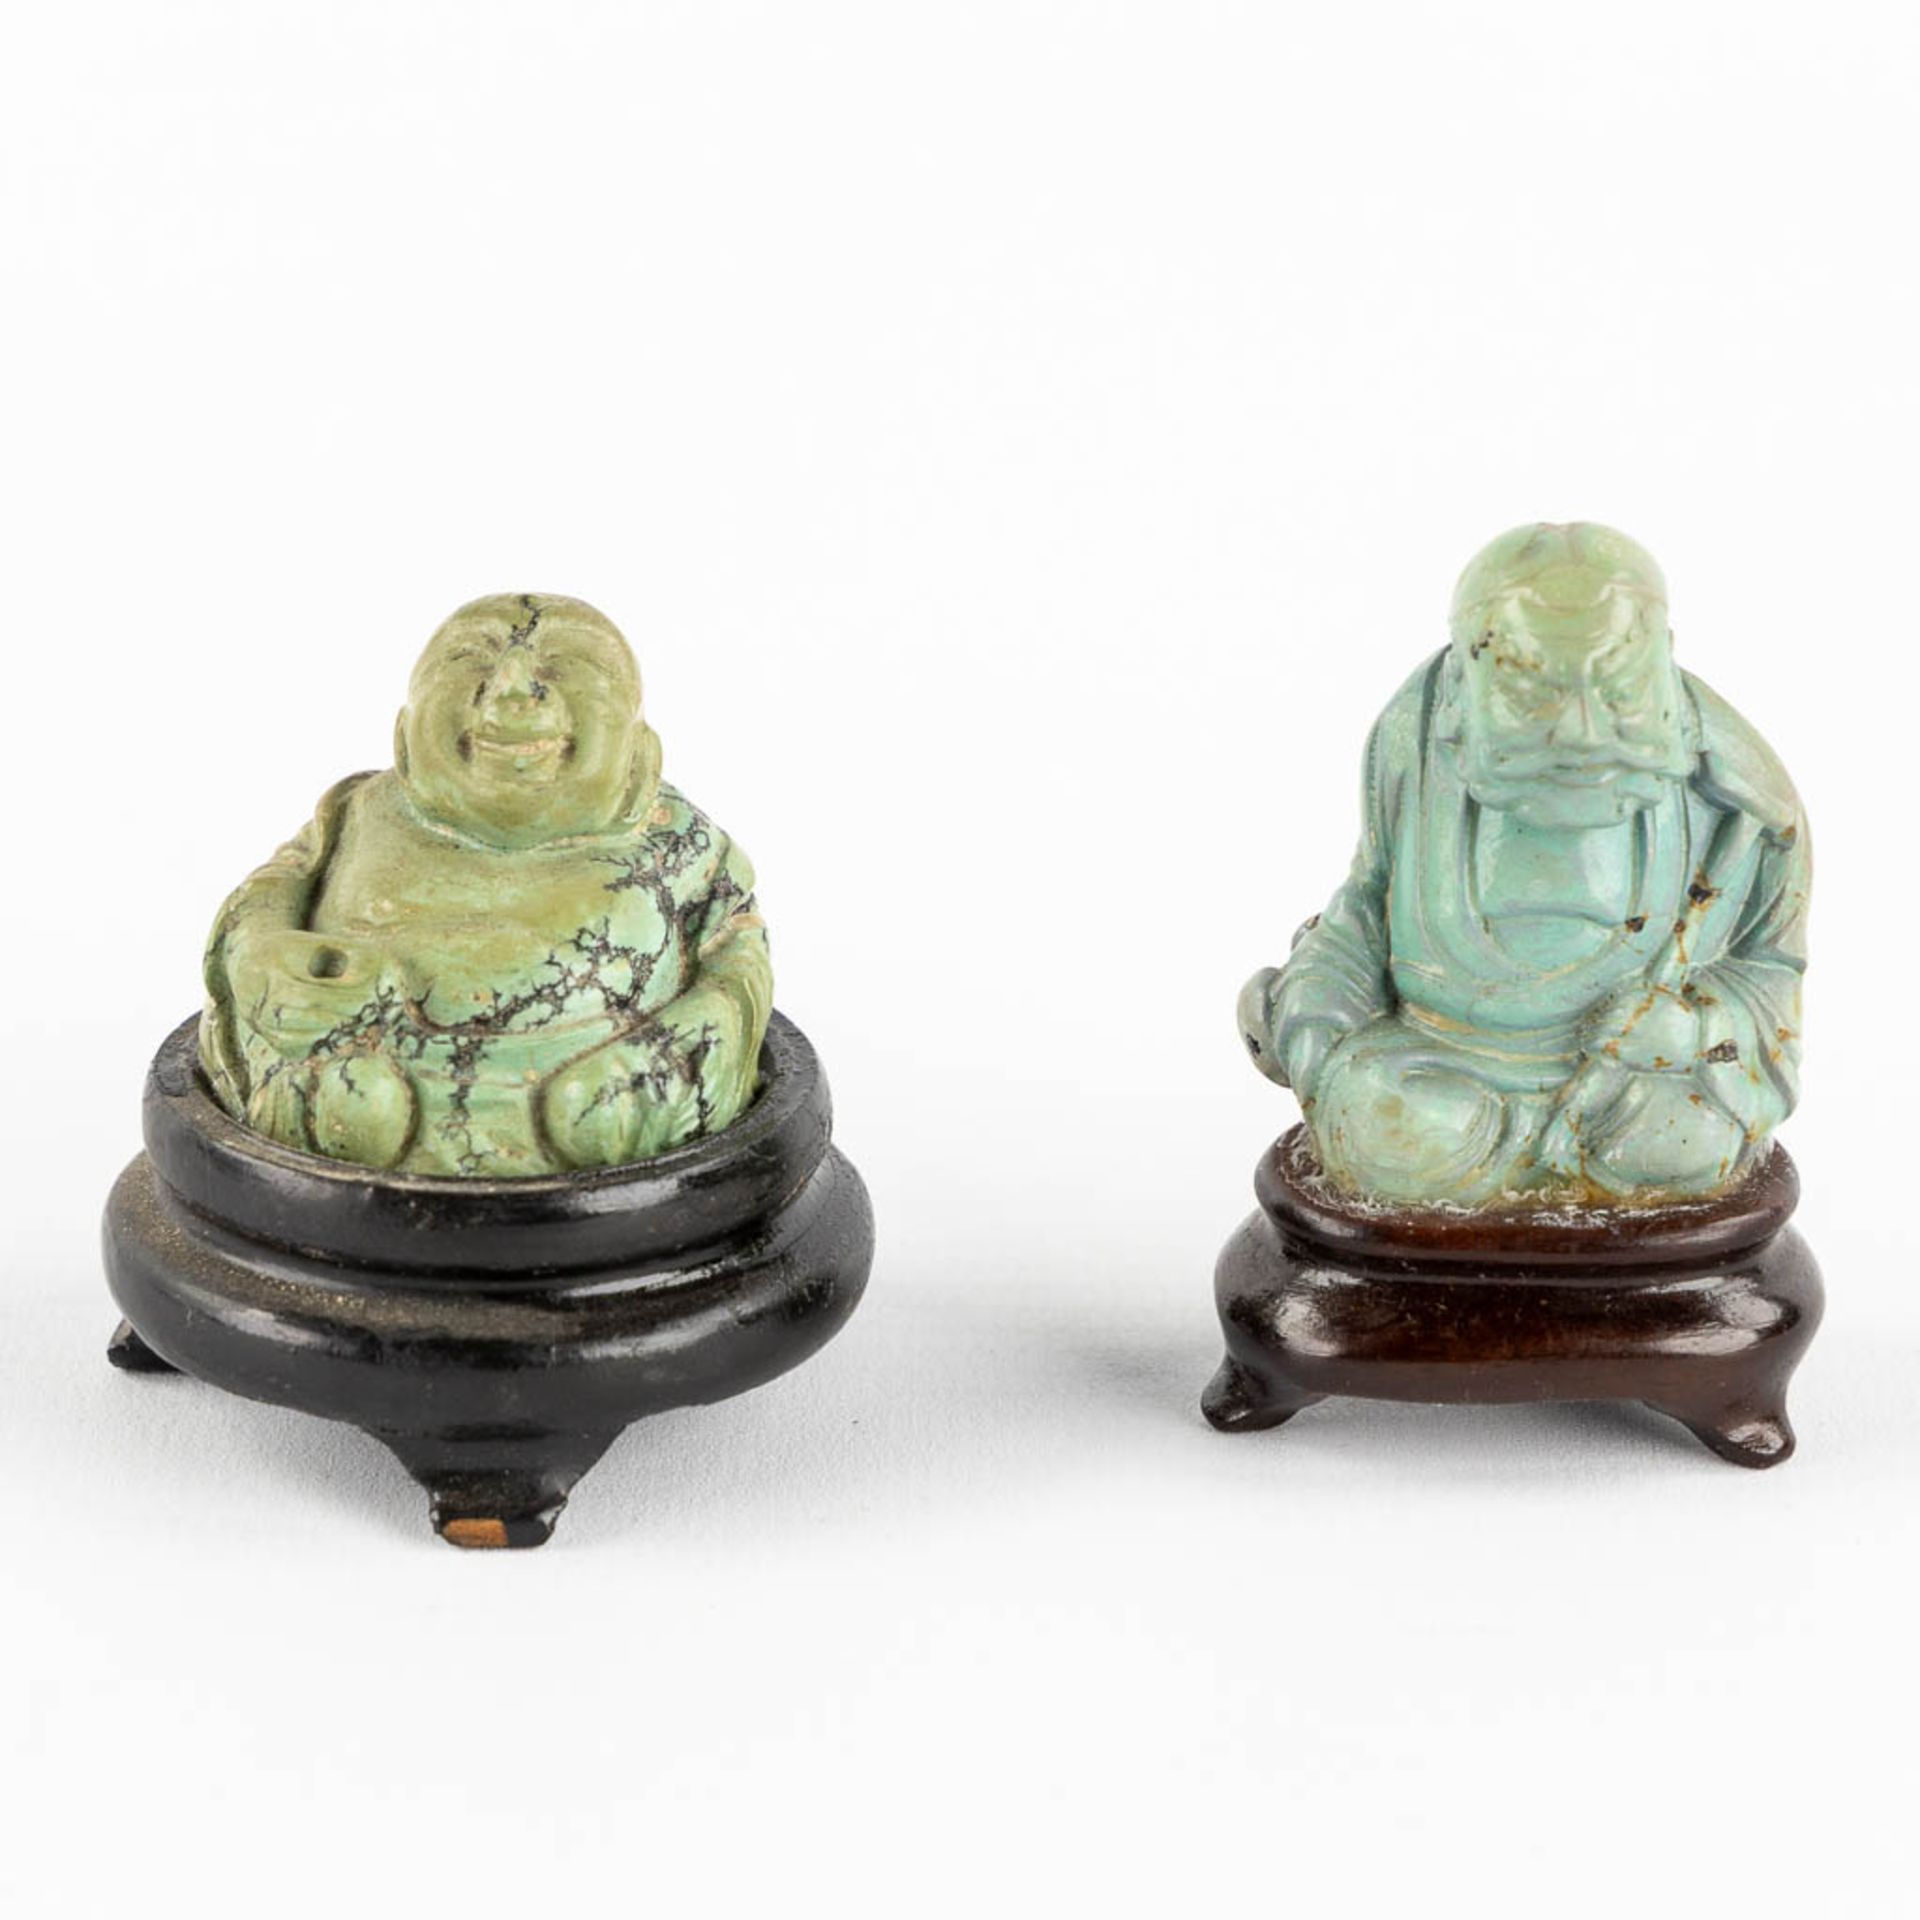 Six Buddha and a snuff bottle, Sculptured hardstones or jade. China. (L:6 x W:8 x H:11,5 cm) - Image 13 of 16